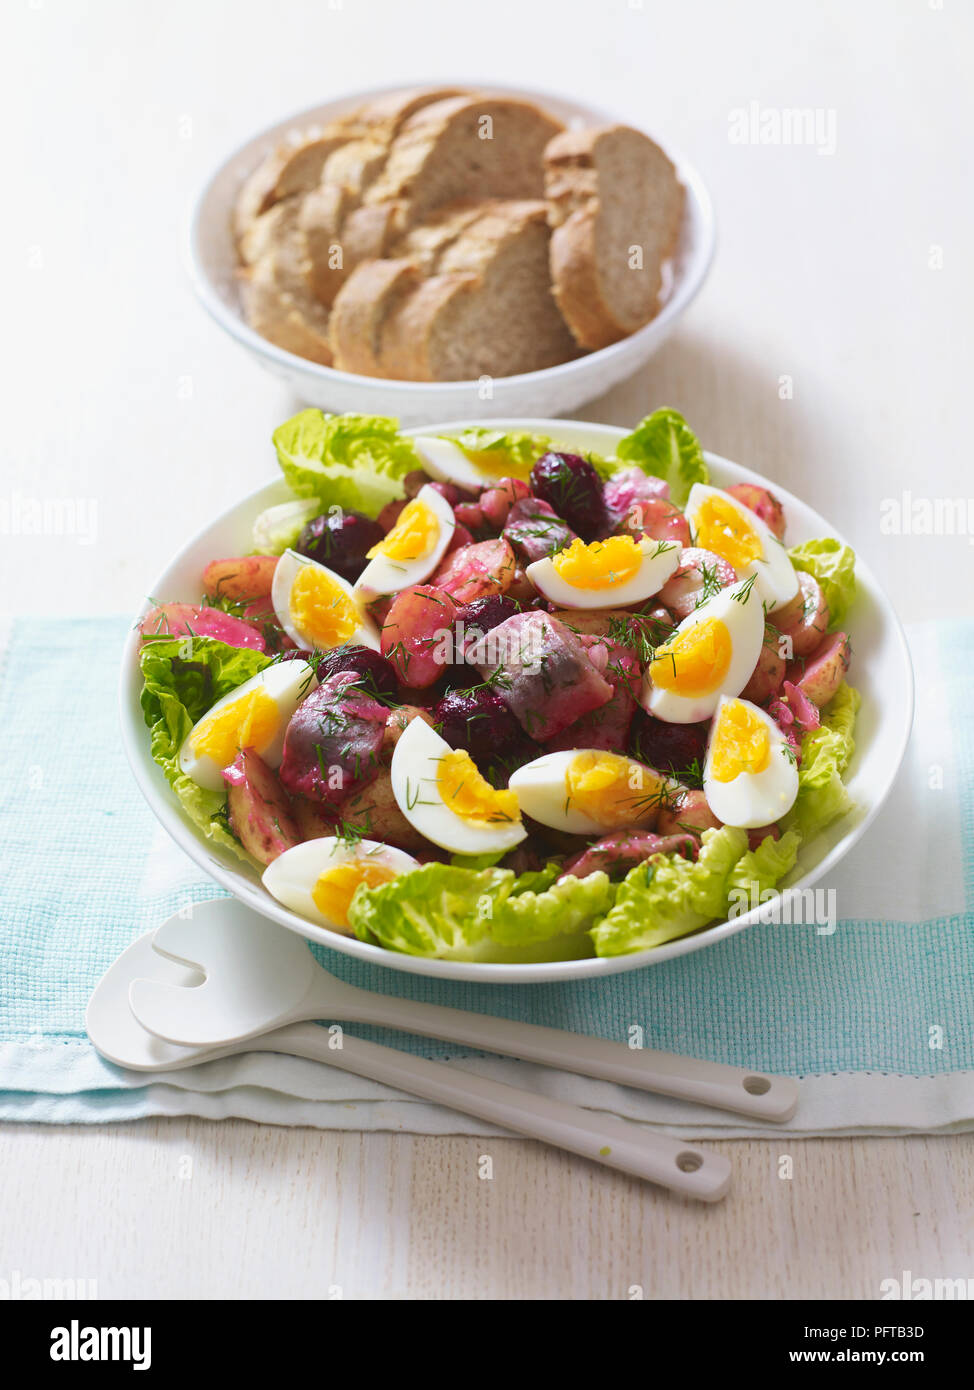 Warm herring and boiled egg salad Stock Photo